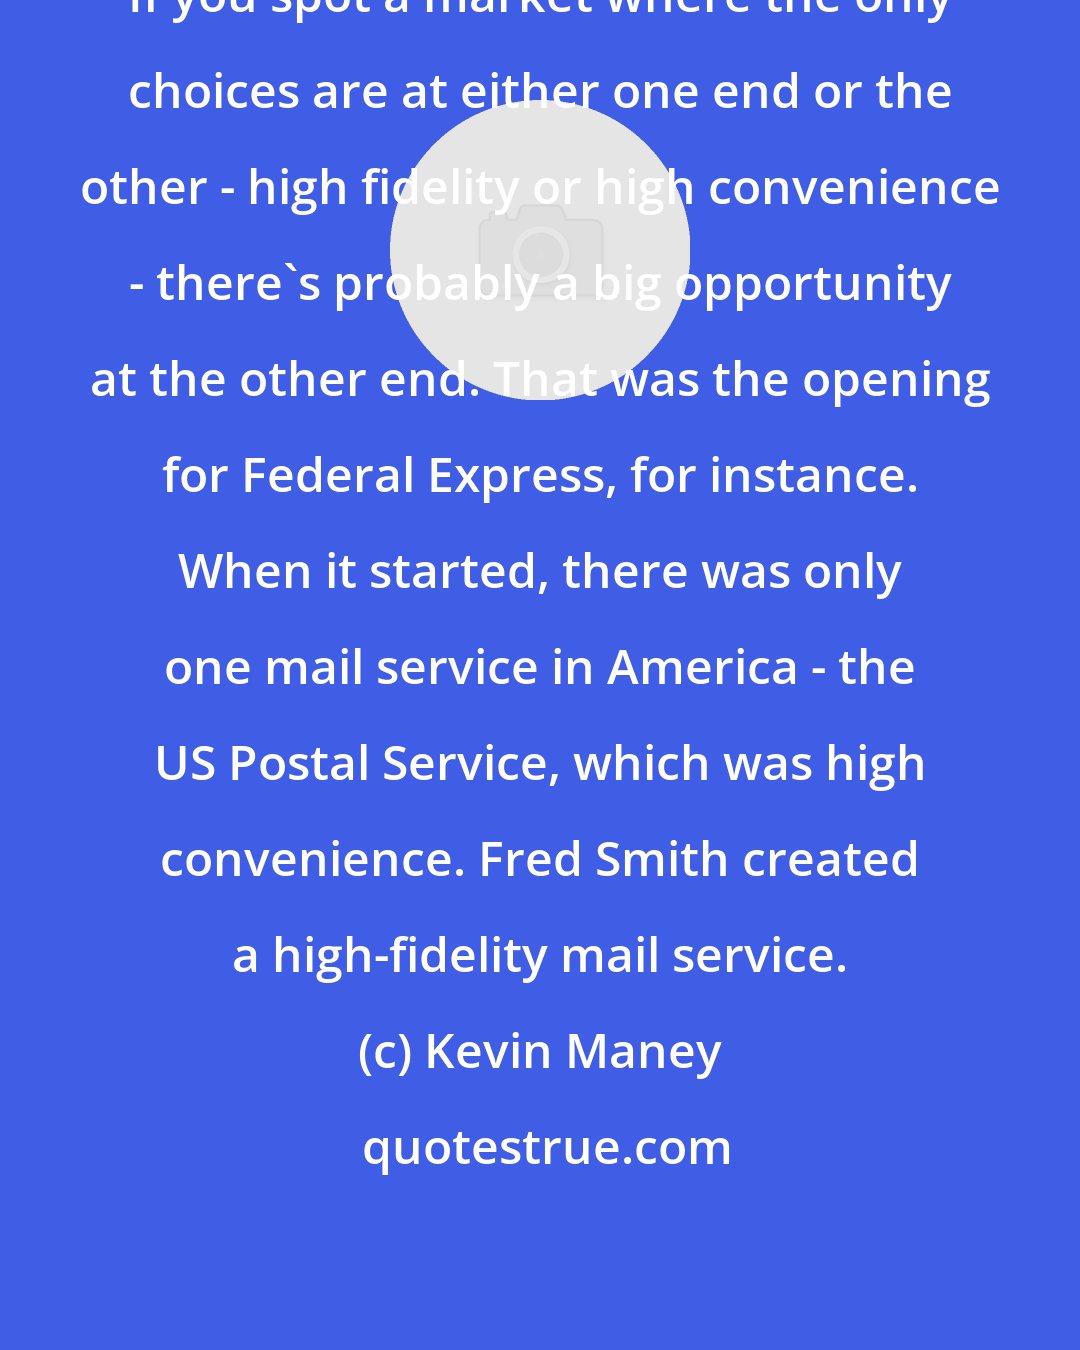 Kevin Maney: If you spot a market where the only choices are at either one end or the other - high fidelity or high convenience - there's probably a big opportunity at the other end. That was the opening for Federal Express, for instance. When it started, there was only one mail service in America - the US Postal Service, which was high convenience. Fred Smith created a high-fidelity mail service.